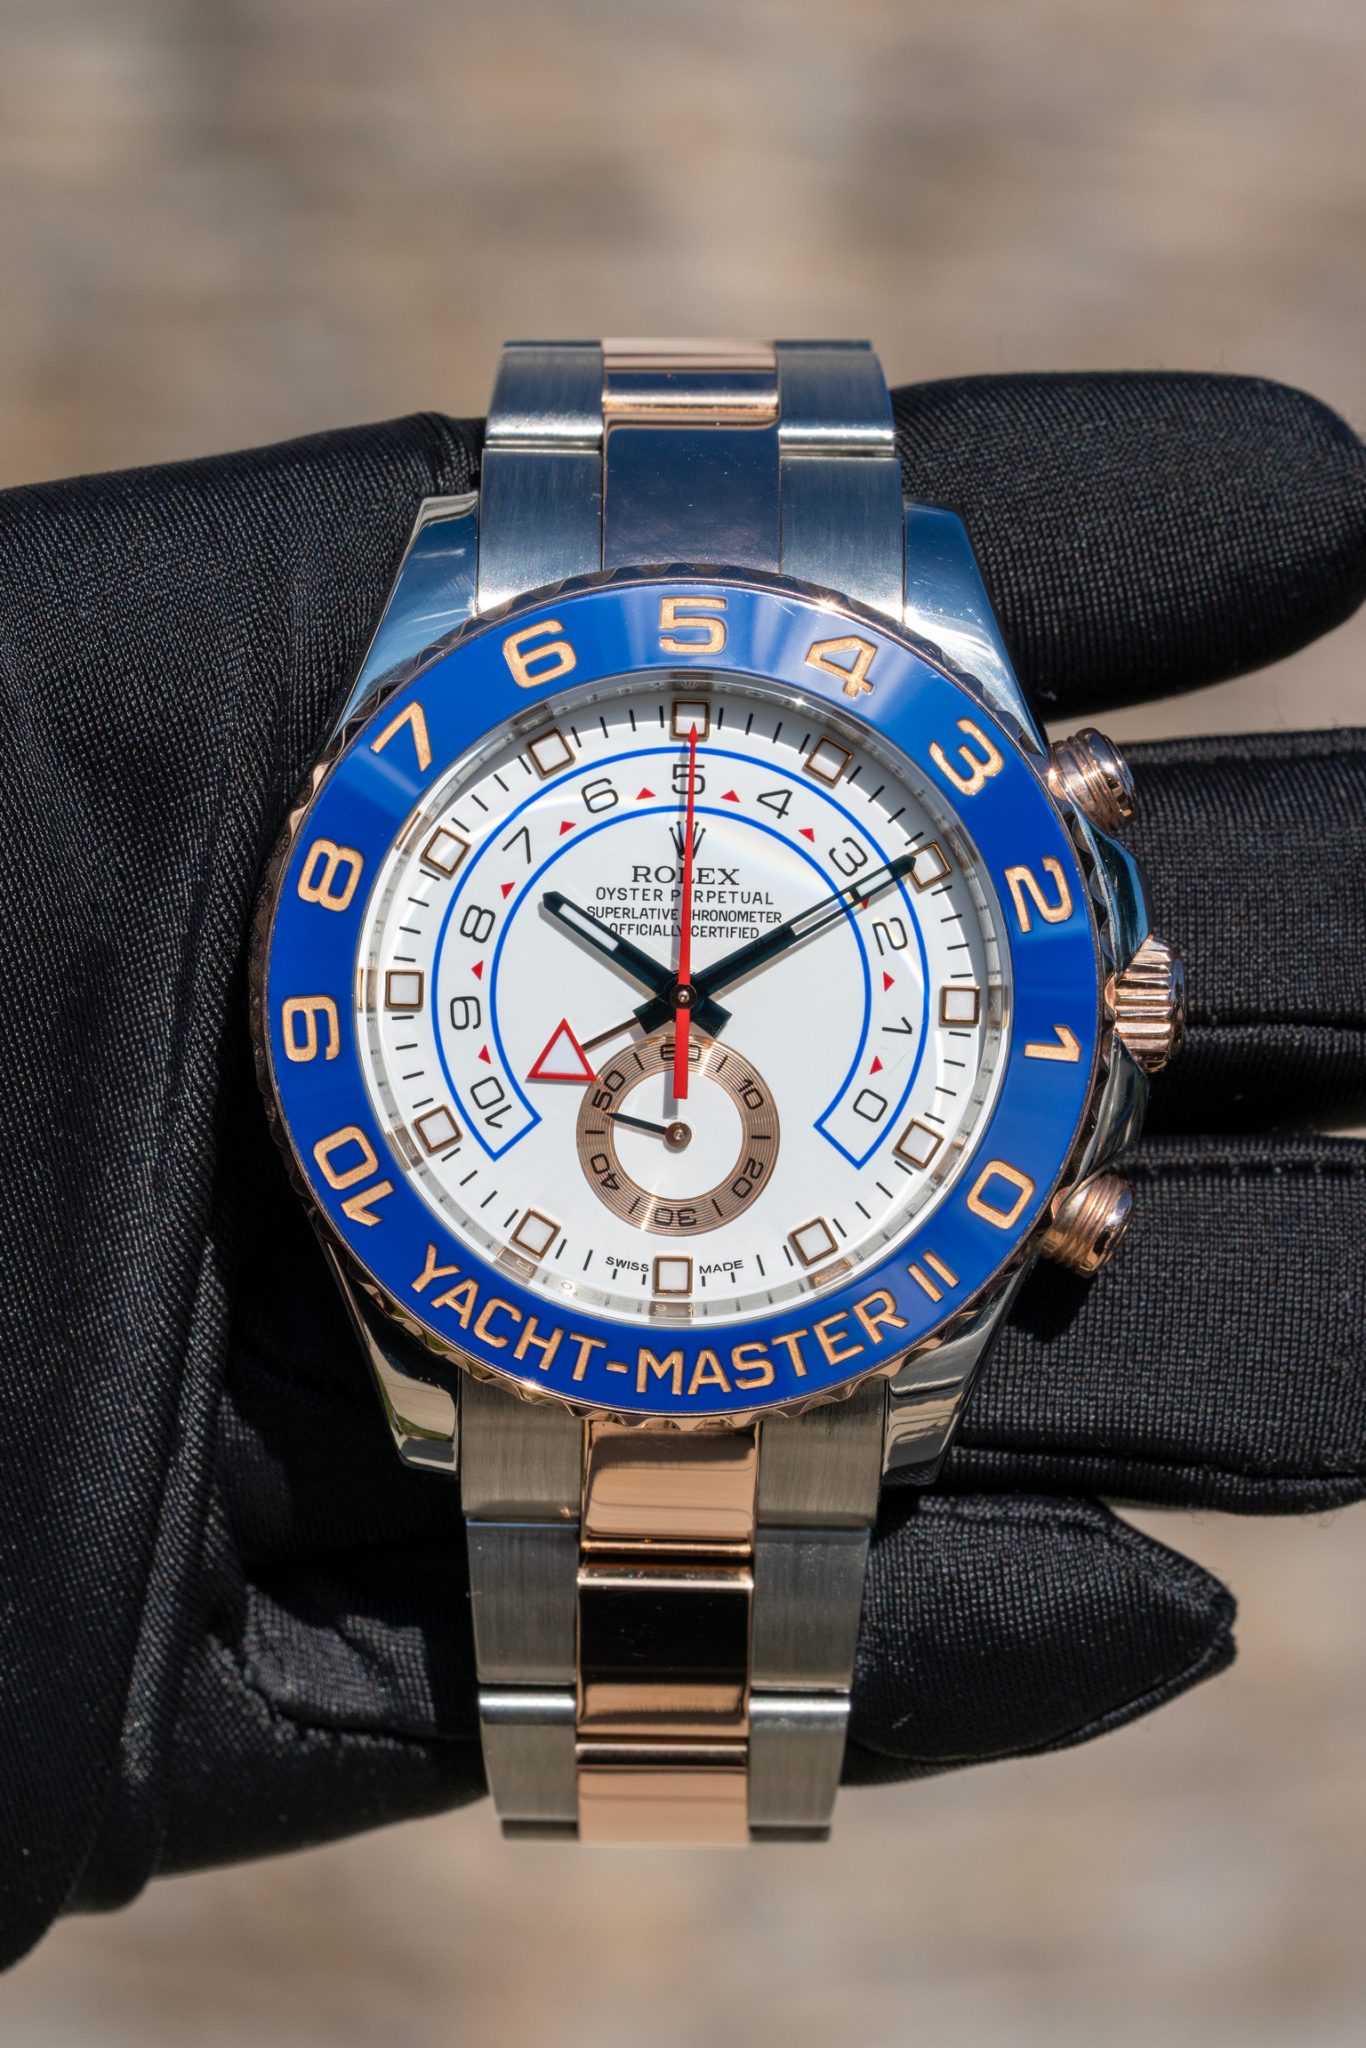 yacht master ii review